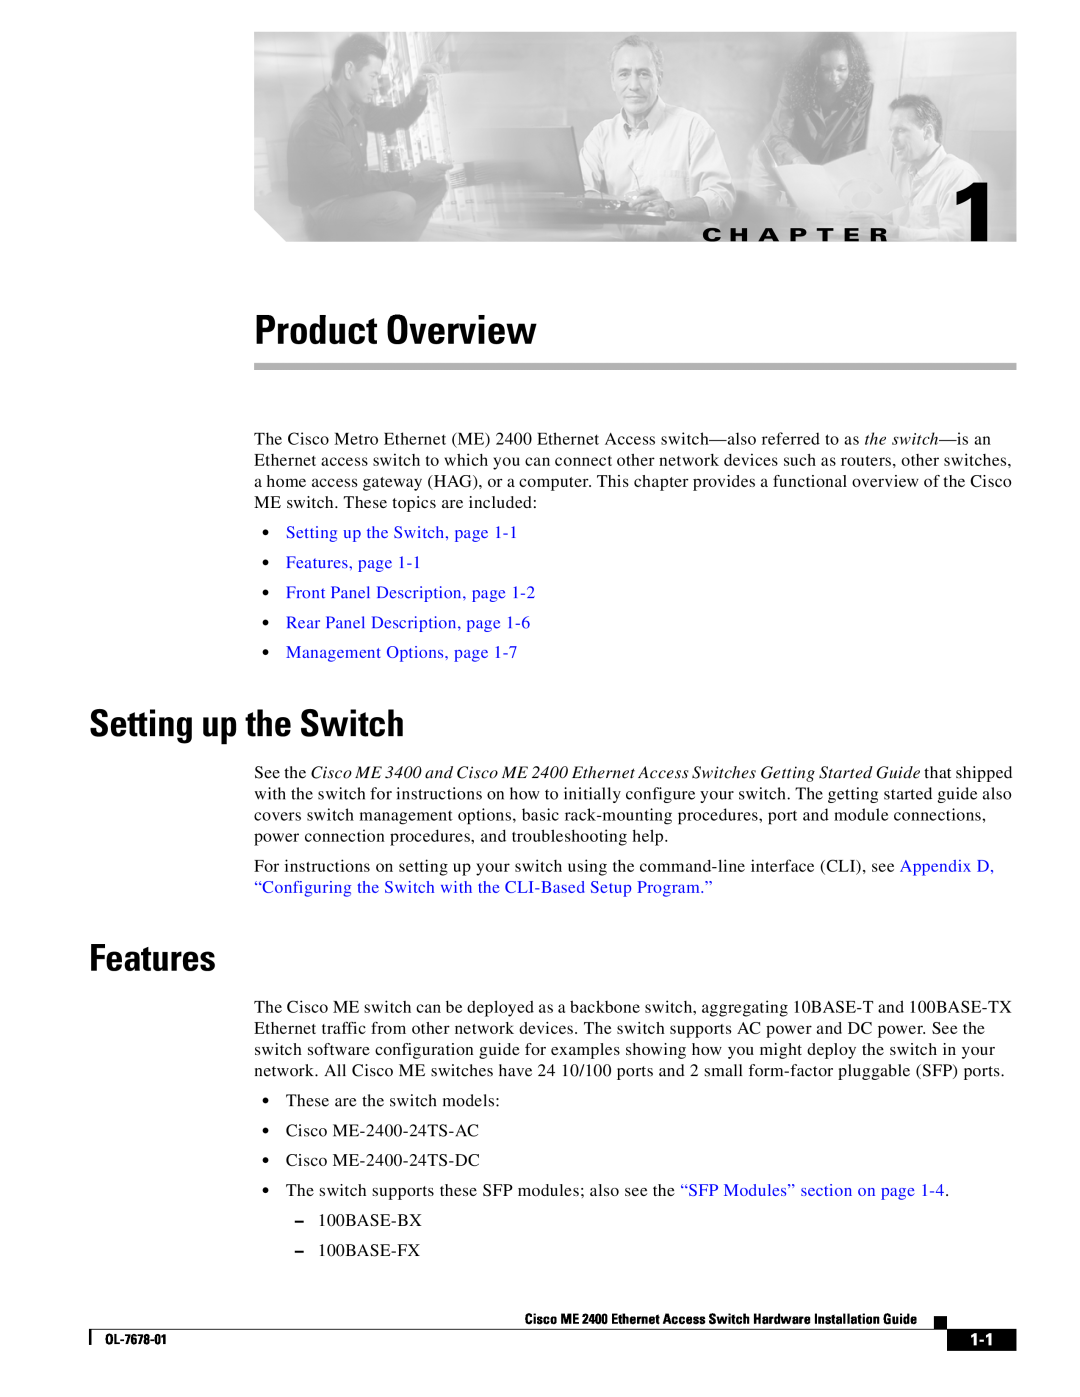 Cisco Systems ME 2400 manual Product Overview, Setting up the Switch, Features, C H A P T E R 